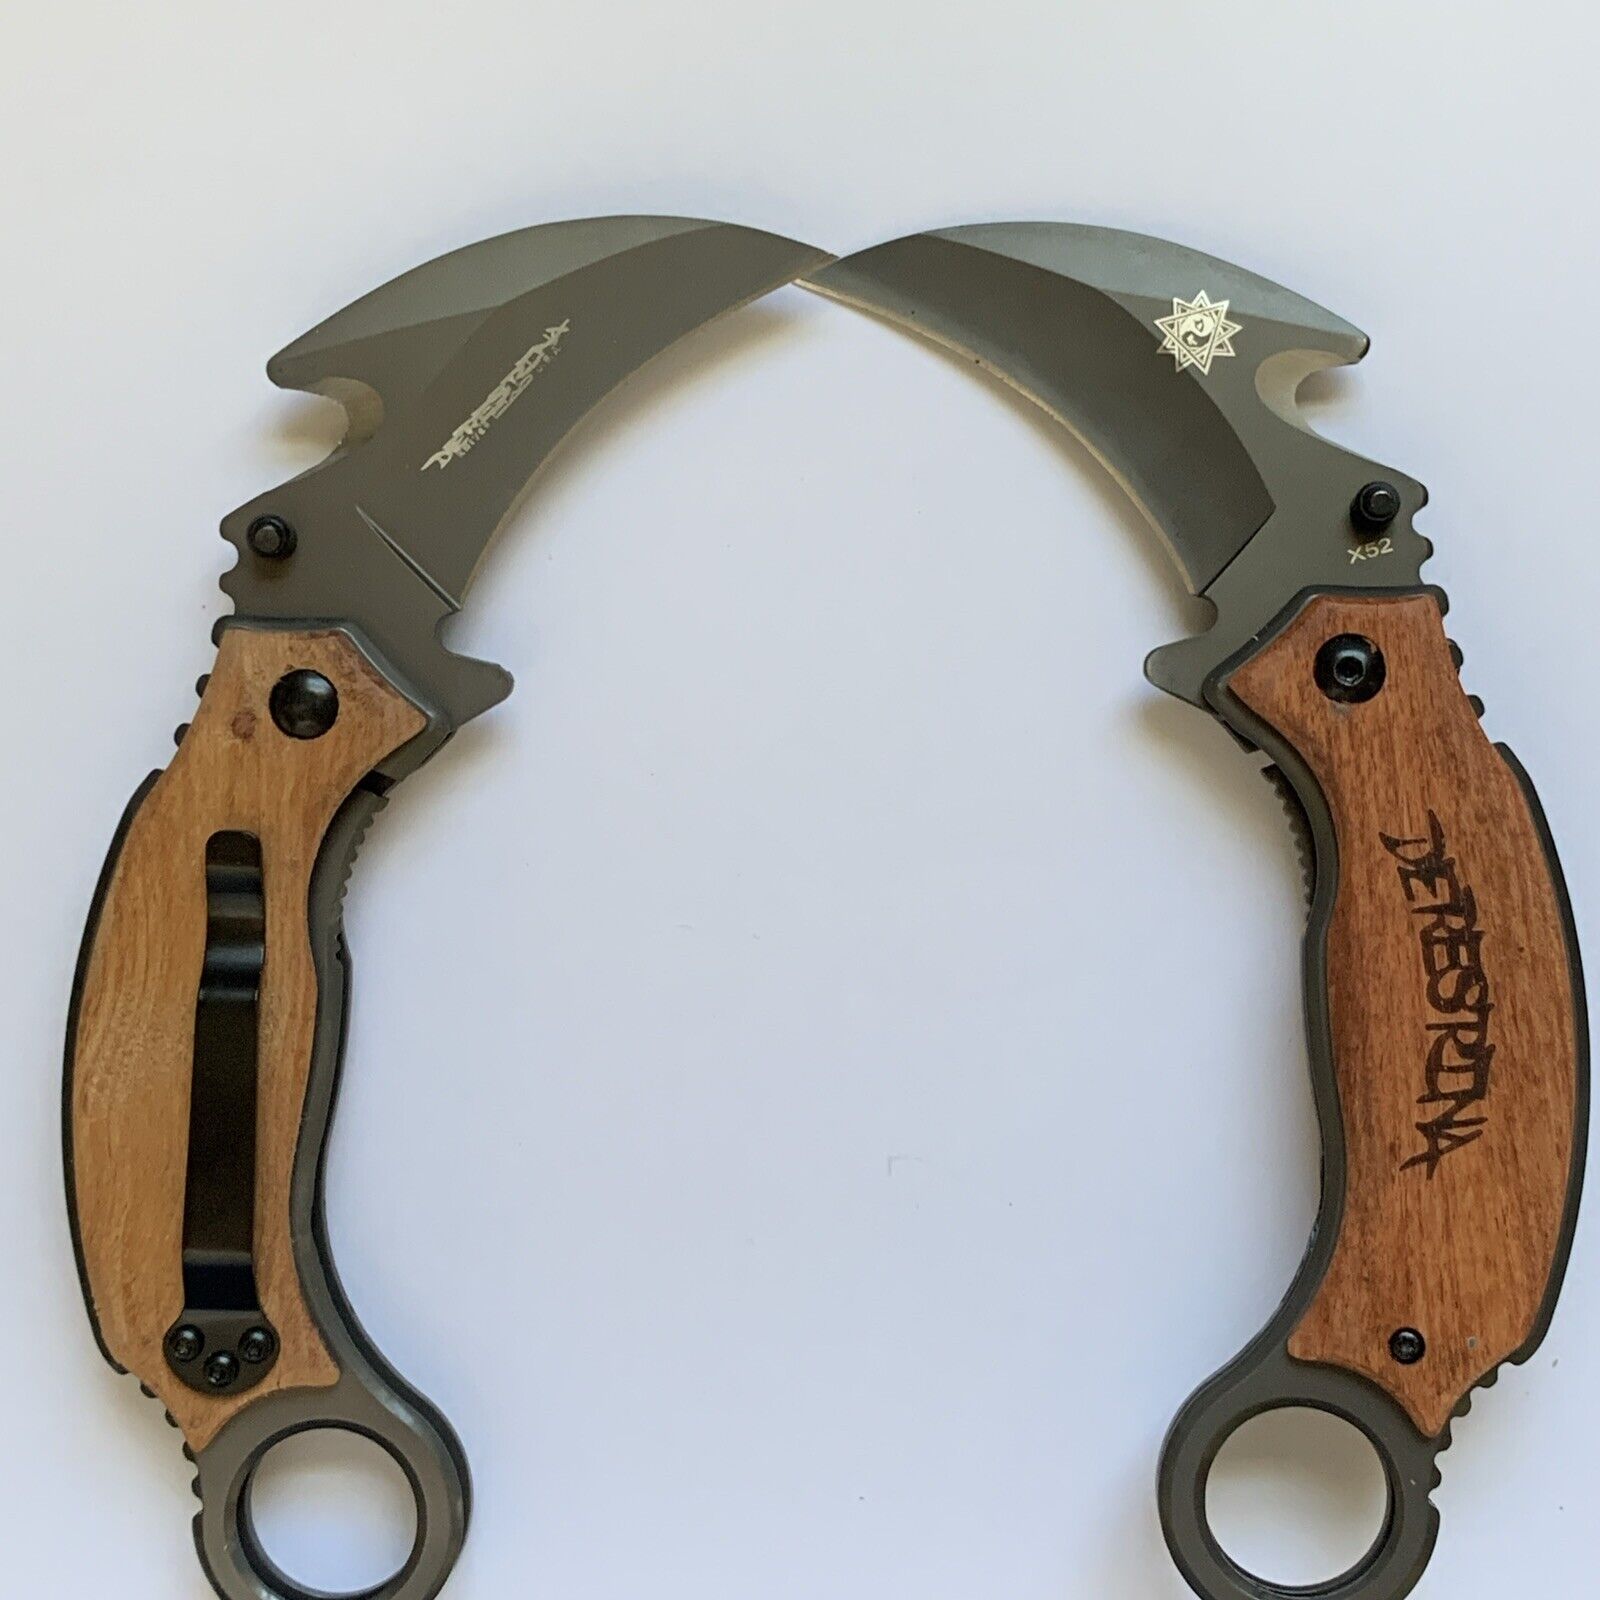 2X EDC Cool Spring Karambit Tactical Assisted Folding Pocket Claw Knives 6.5”